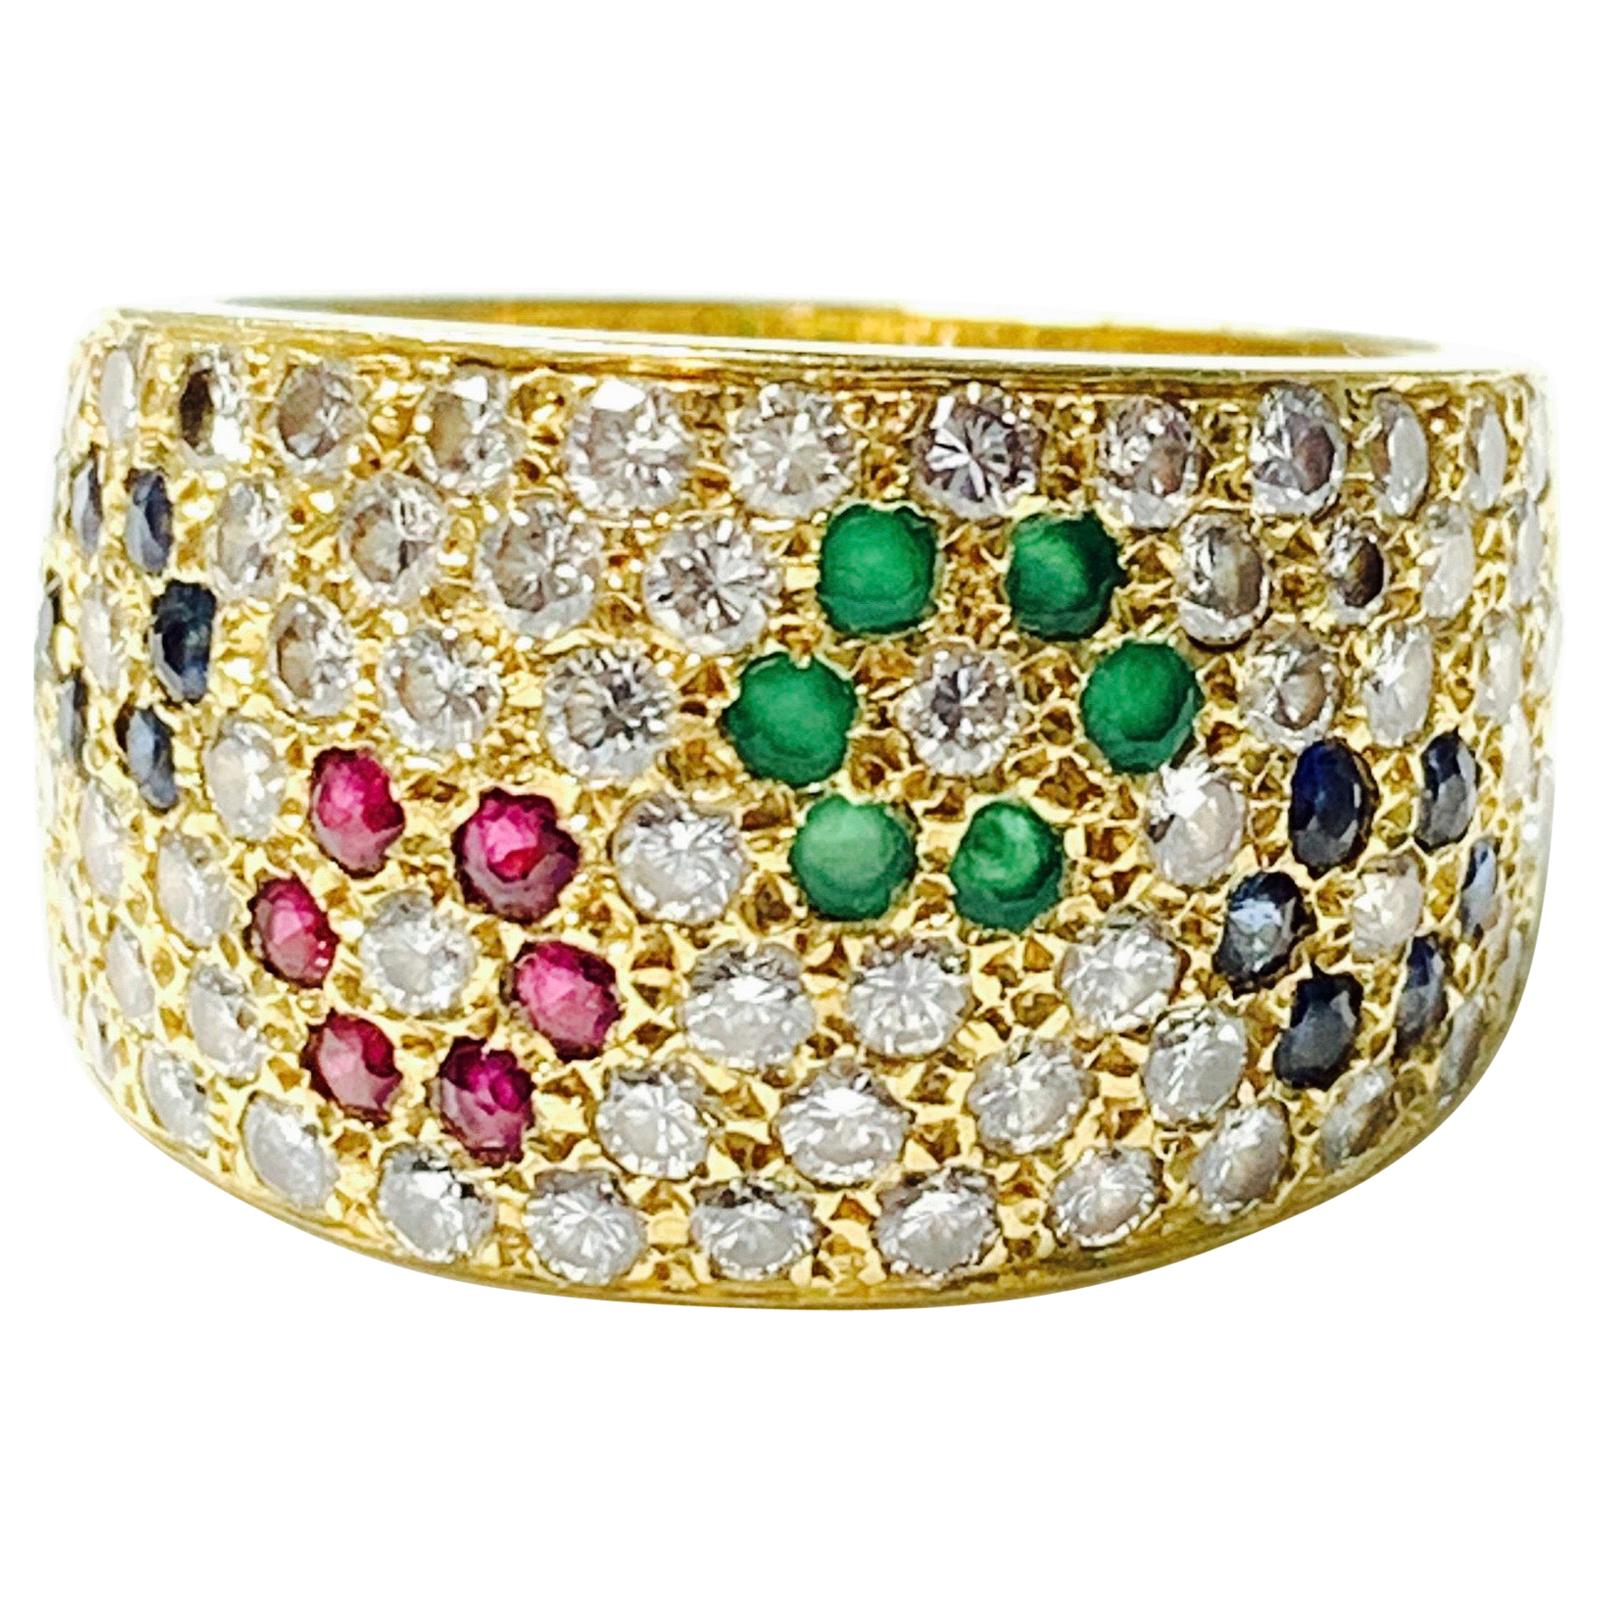 Diamond, Ruby, Emerald and Blue Sapphire Ring in 18 K Gold